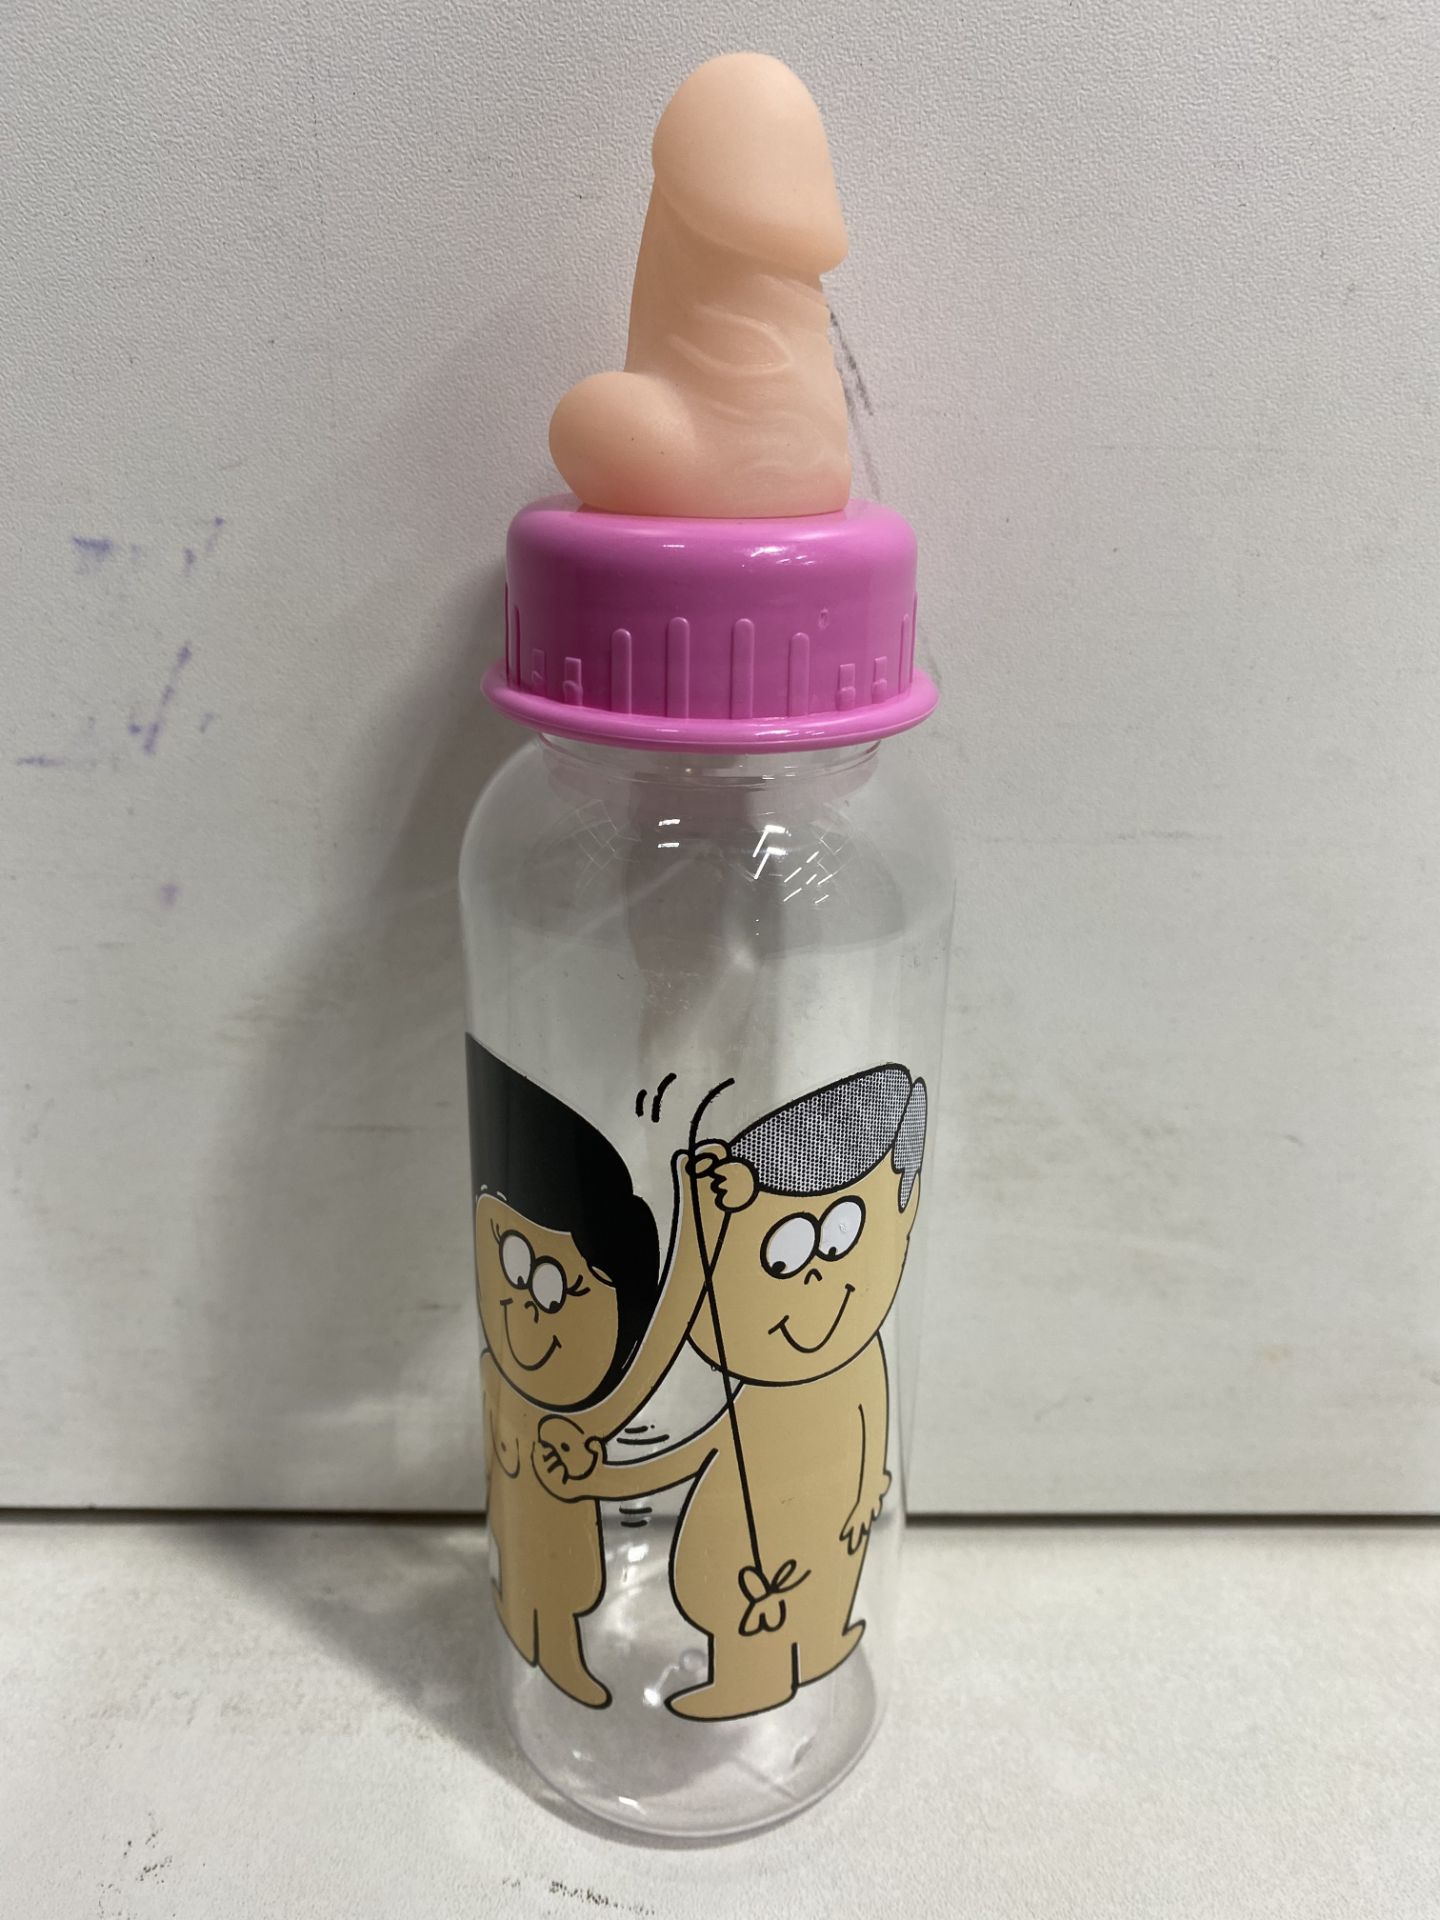 11 x Big Girl Bottle With Penis Mouthpiece - Image 3 of 3